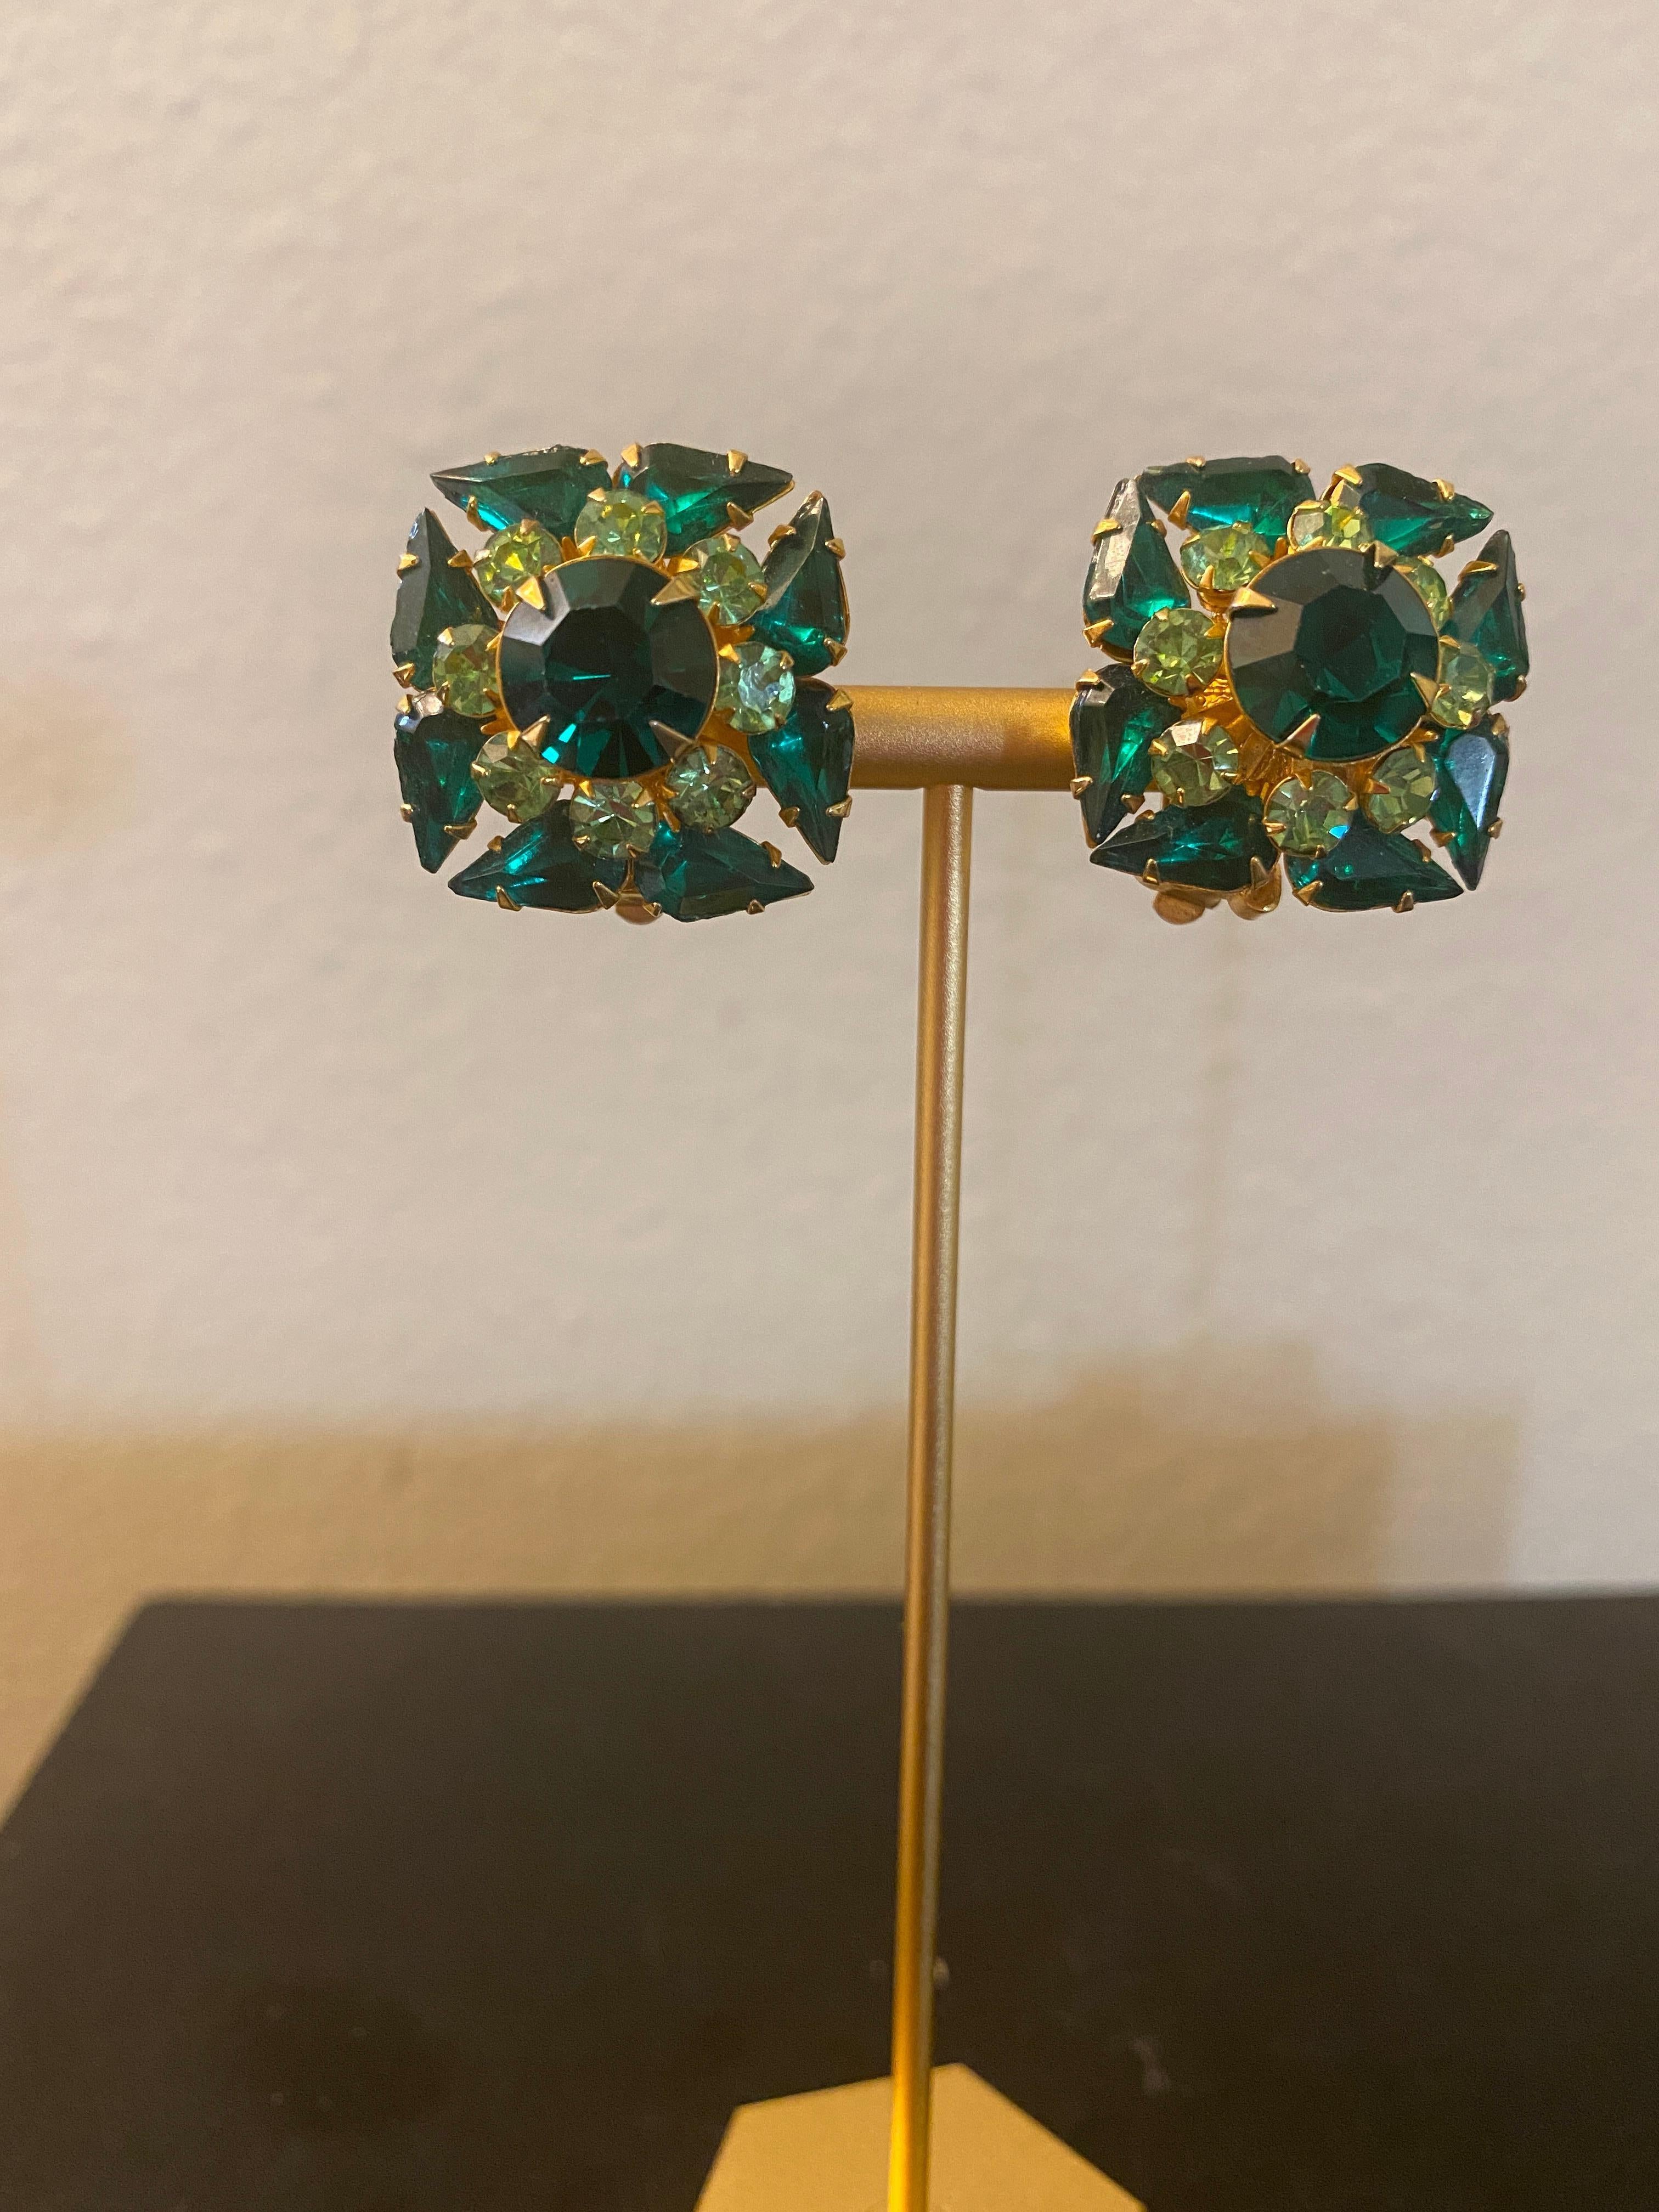 We have collected vintage costume jewelry earrings since the 80’s. One by one we have curated a lovely collection of unbranded and design earrings. Made from the 1950s to 2000. Each one unique and worthy of a modern Fashionista’s collection. We are